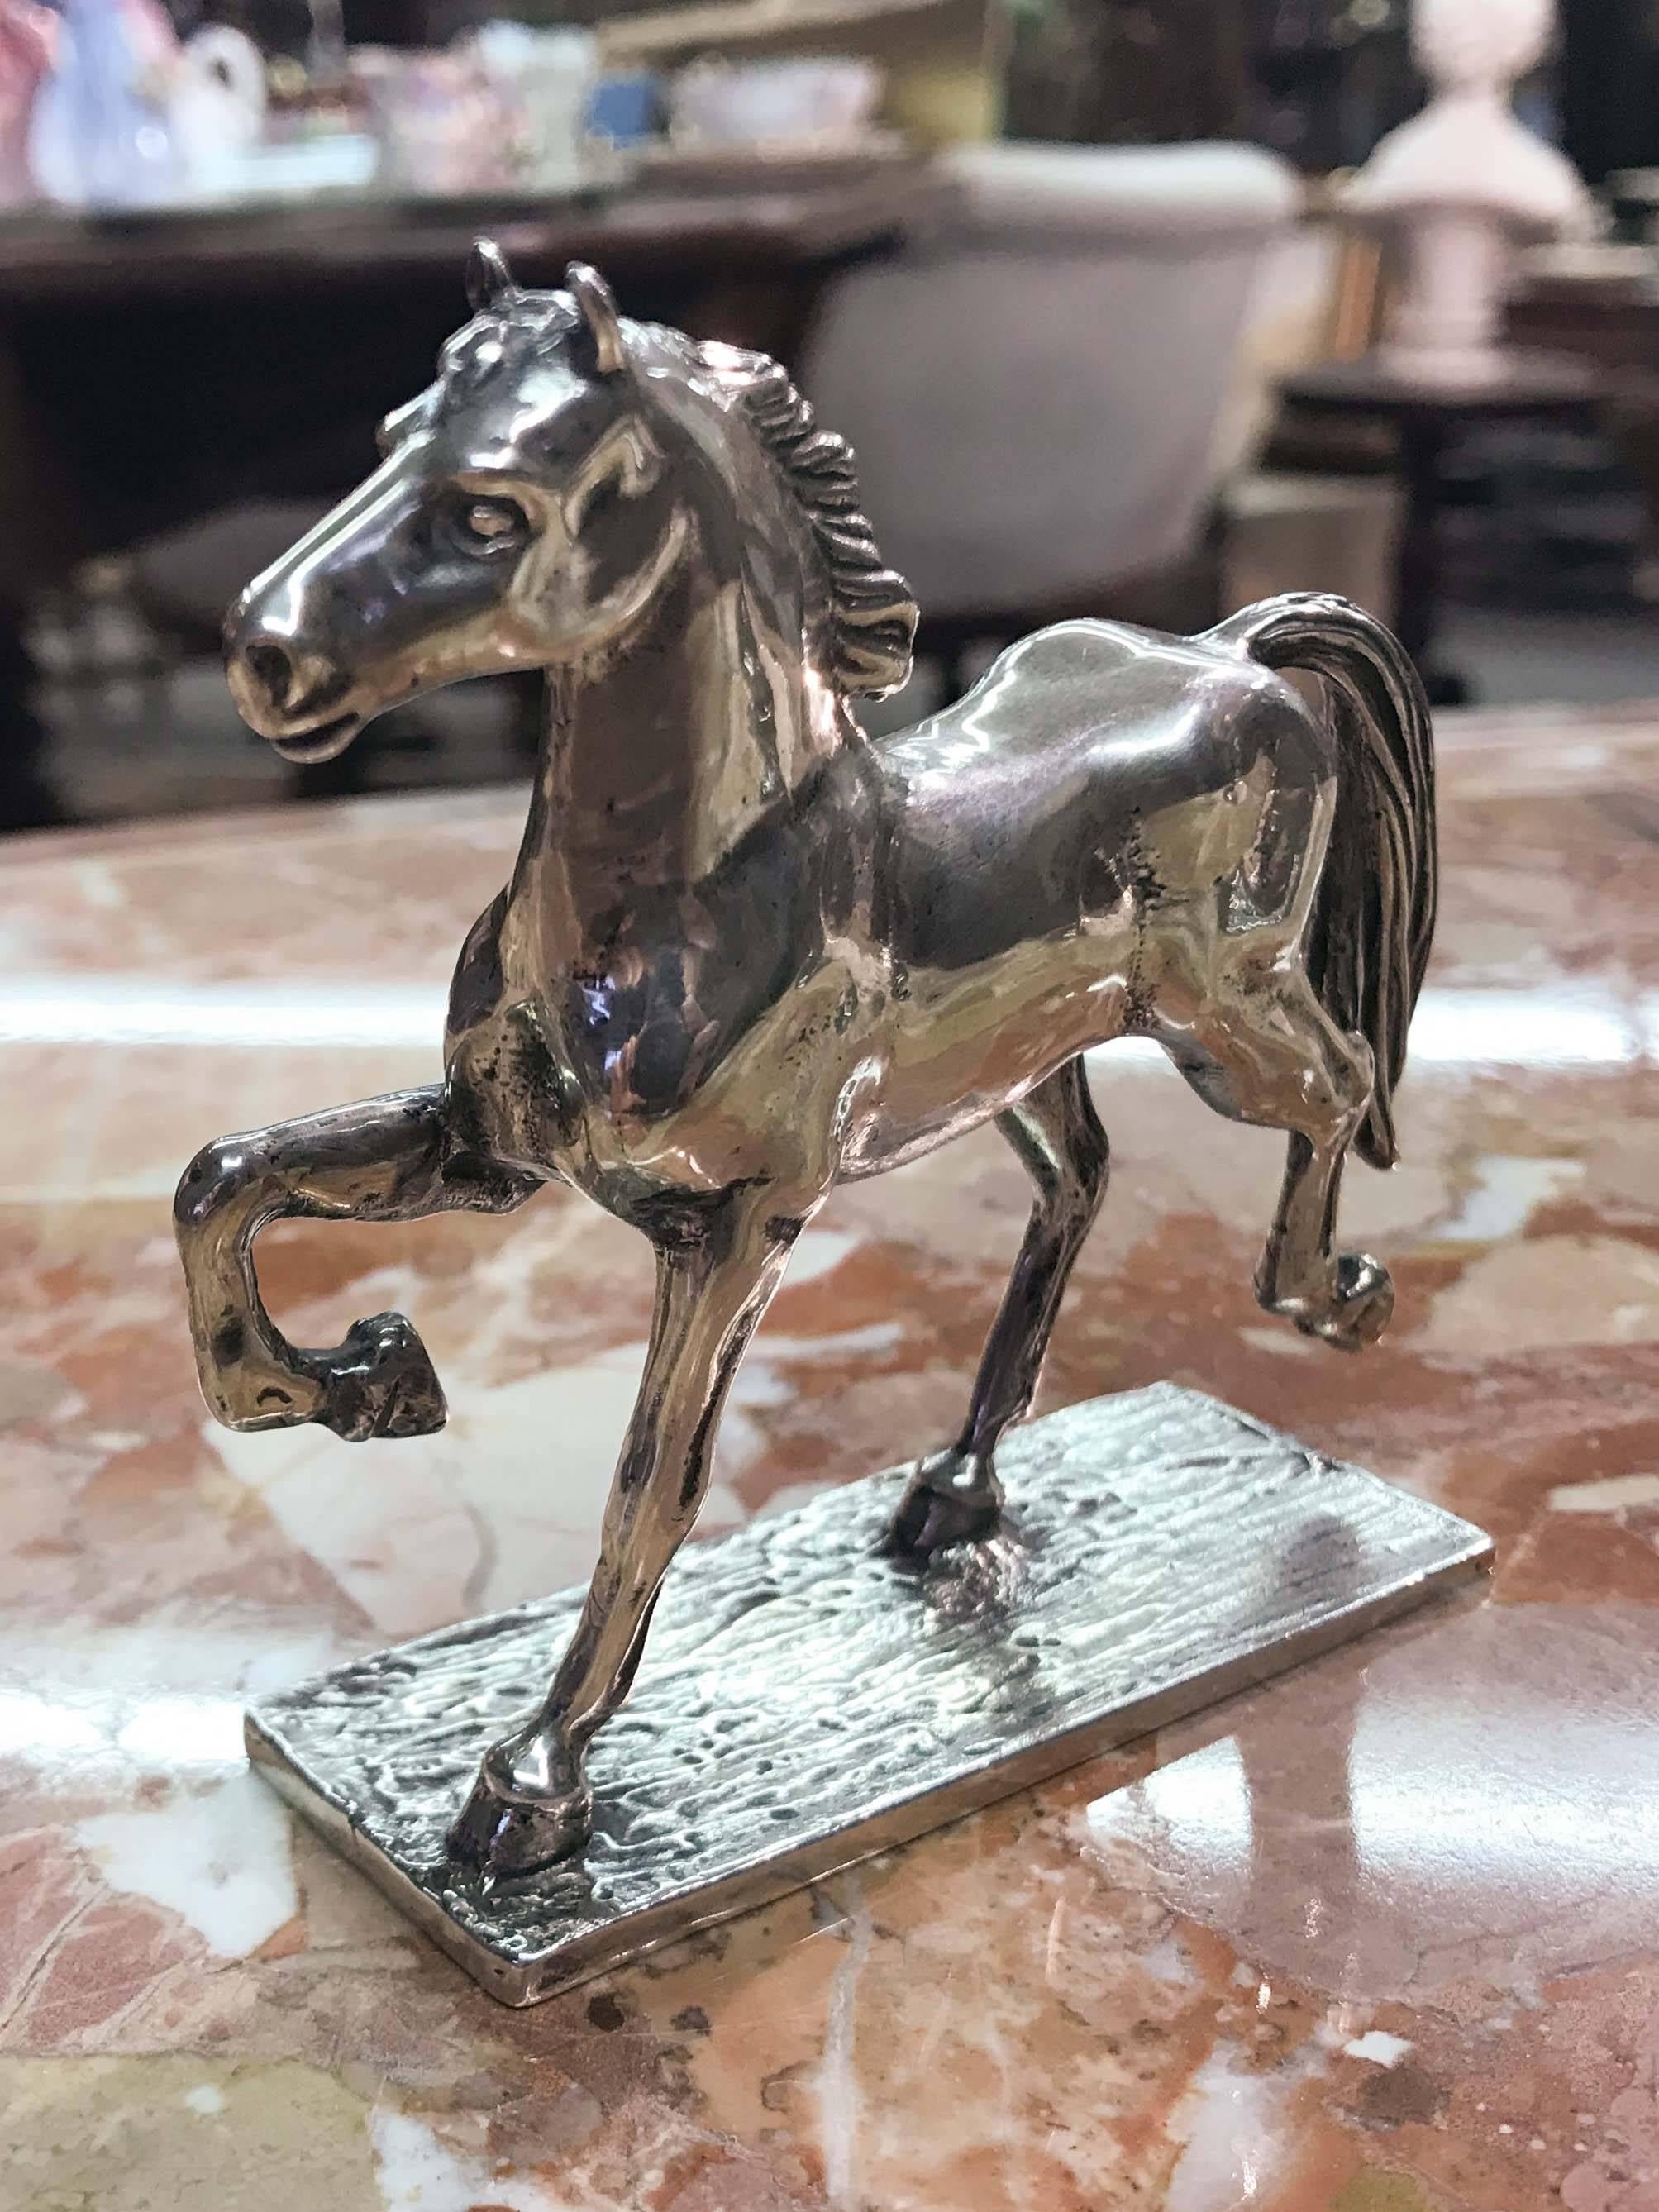 Solid silver horse figurine by S. Kirk & Sons. Stamped, in very good vintage condition.